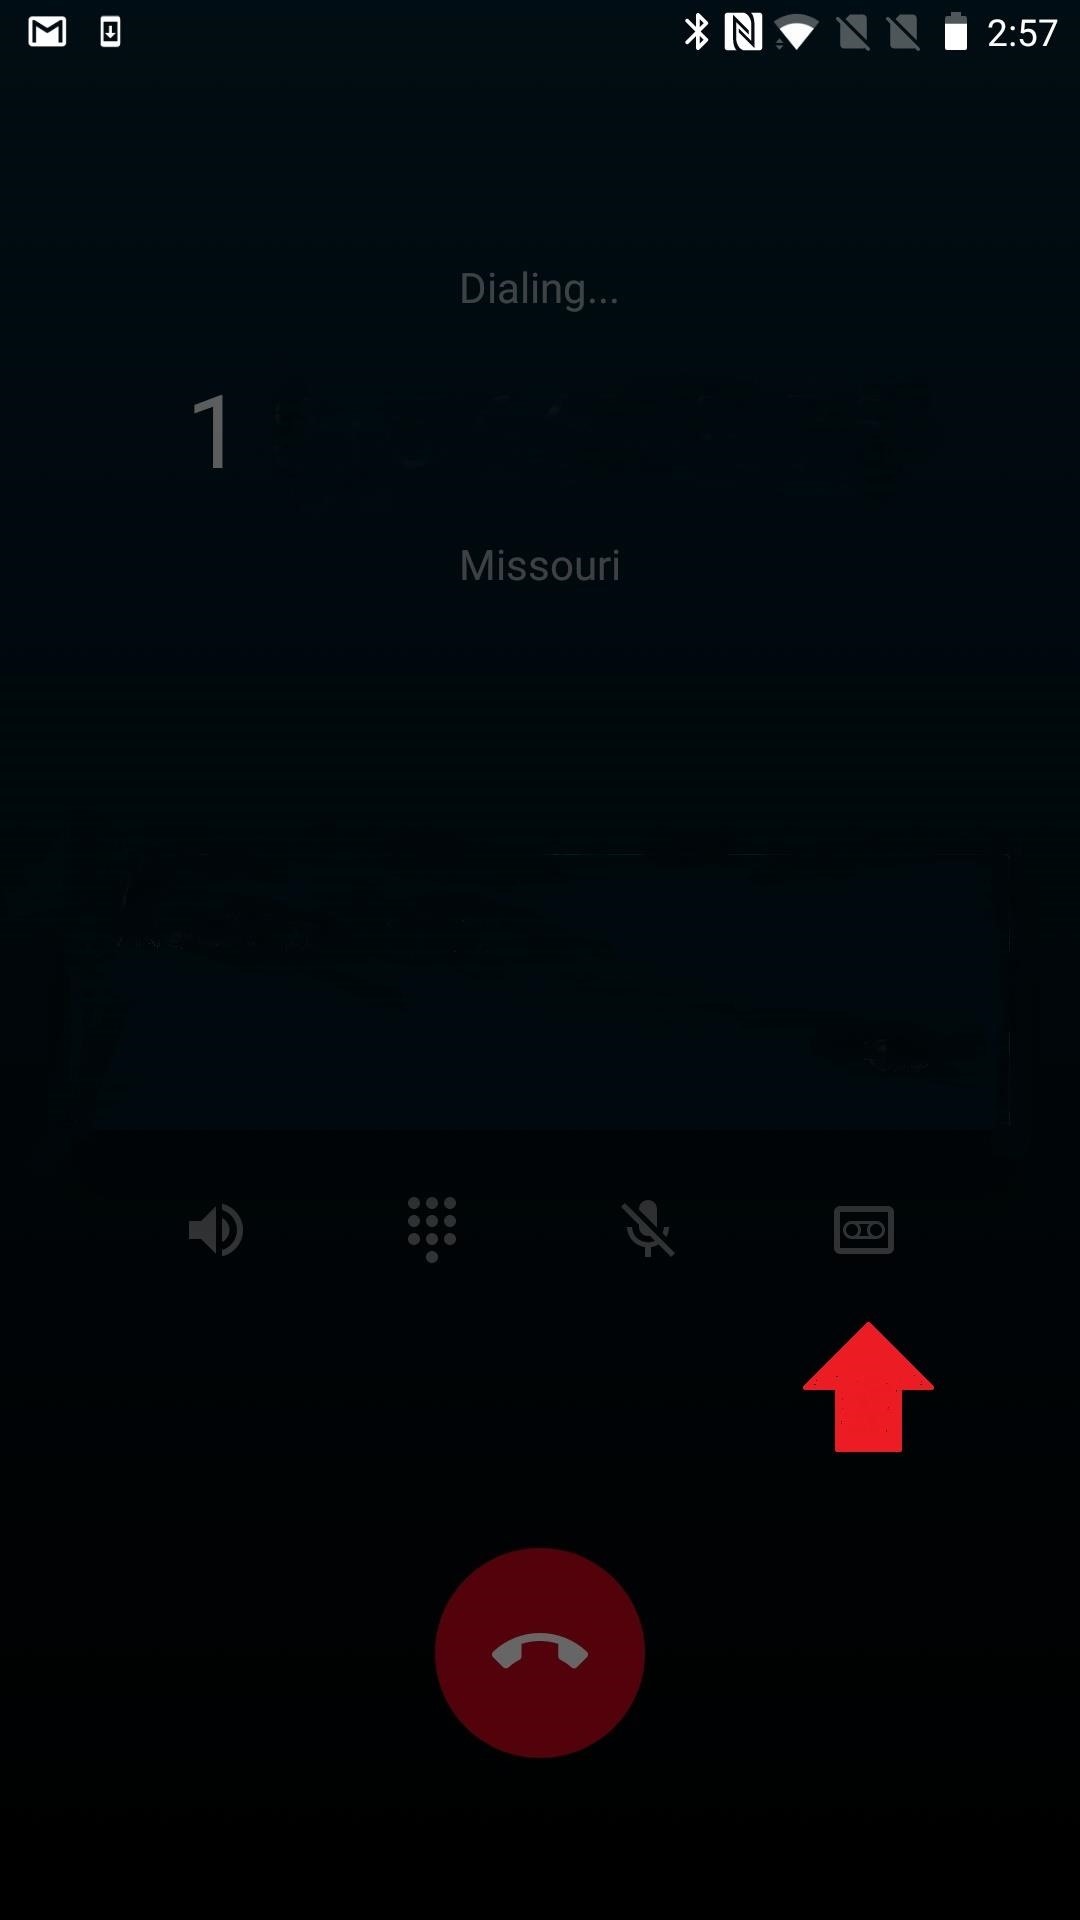 How to Enable Call Recording on Your OnePlus Device in the Stock Phone App